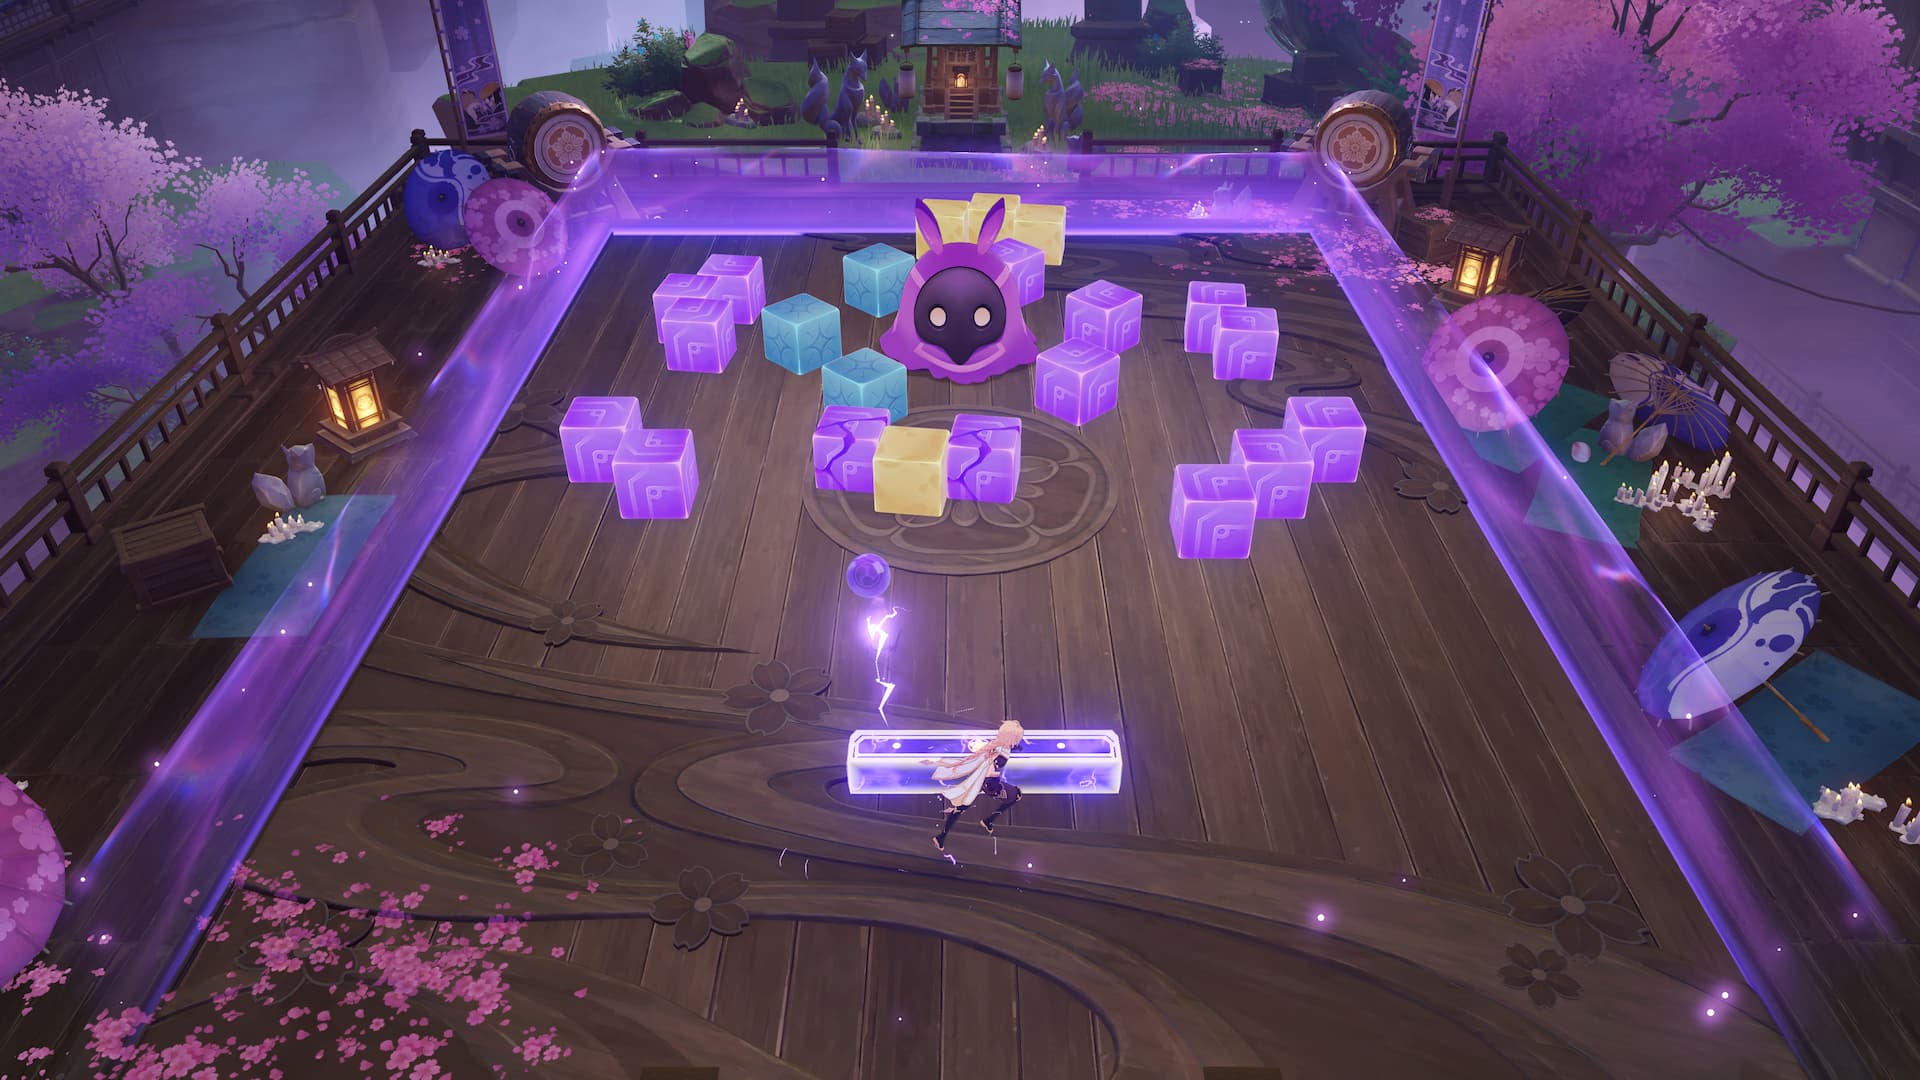 Genshin Impact 3.5 brings its own version of Pac-Man in new event leak: block breaker mini-game with purple blocks on a wooden board